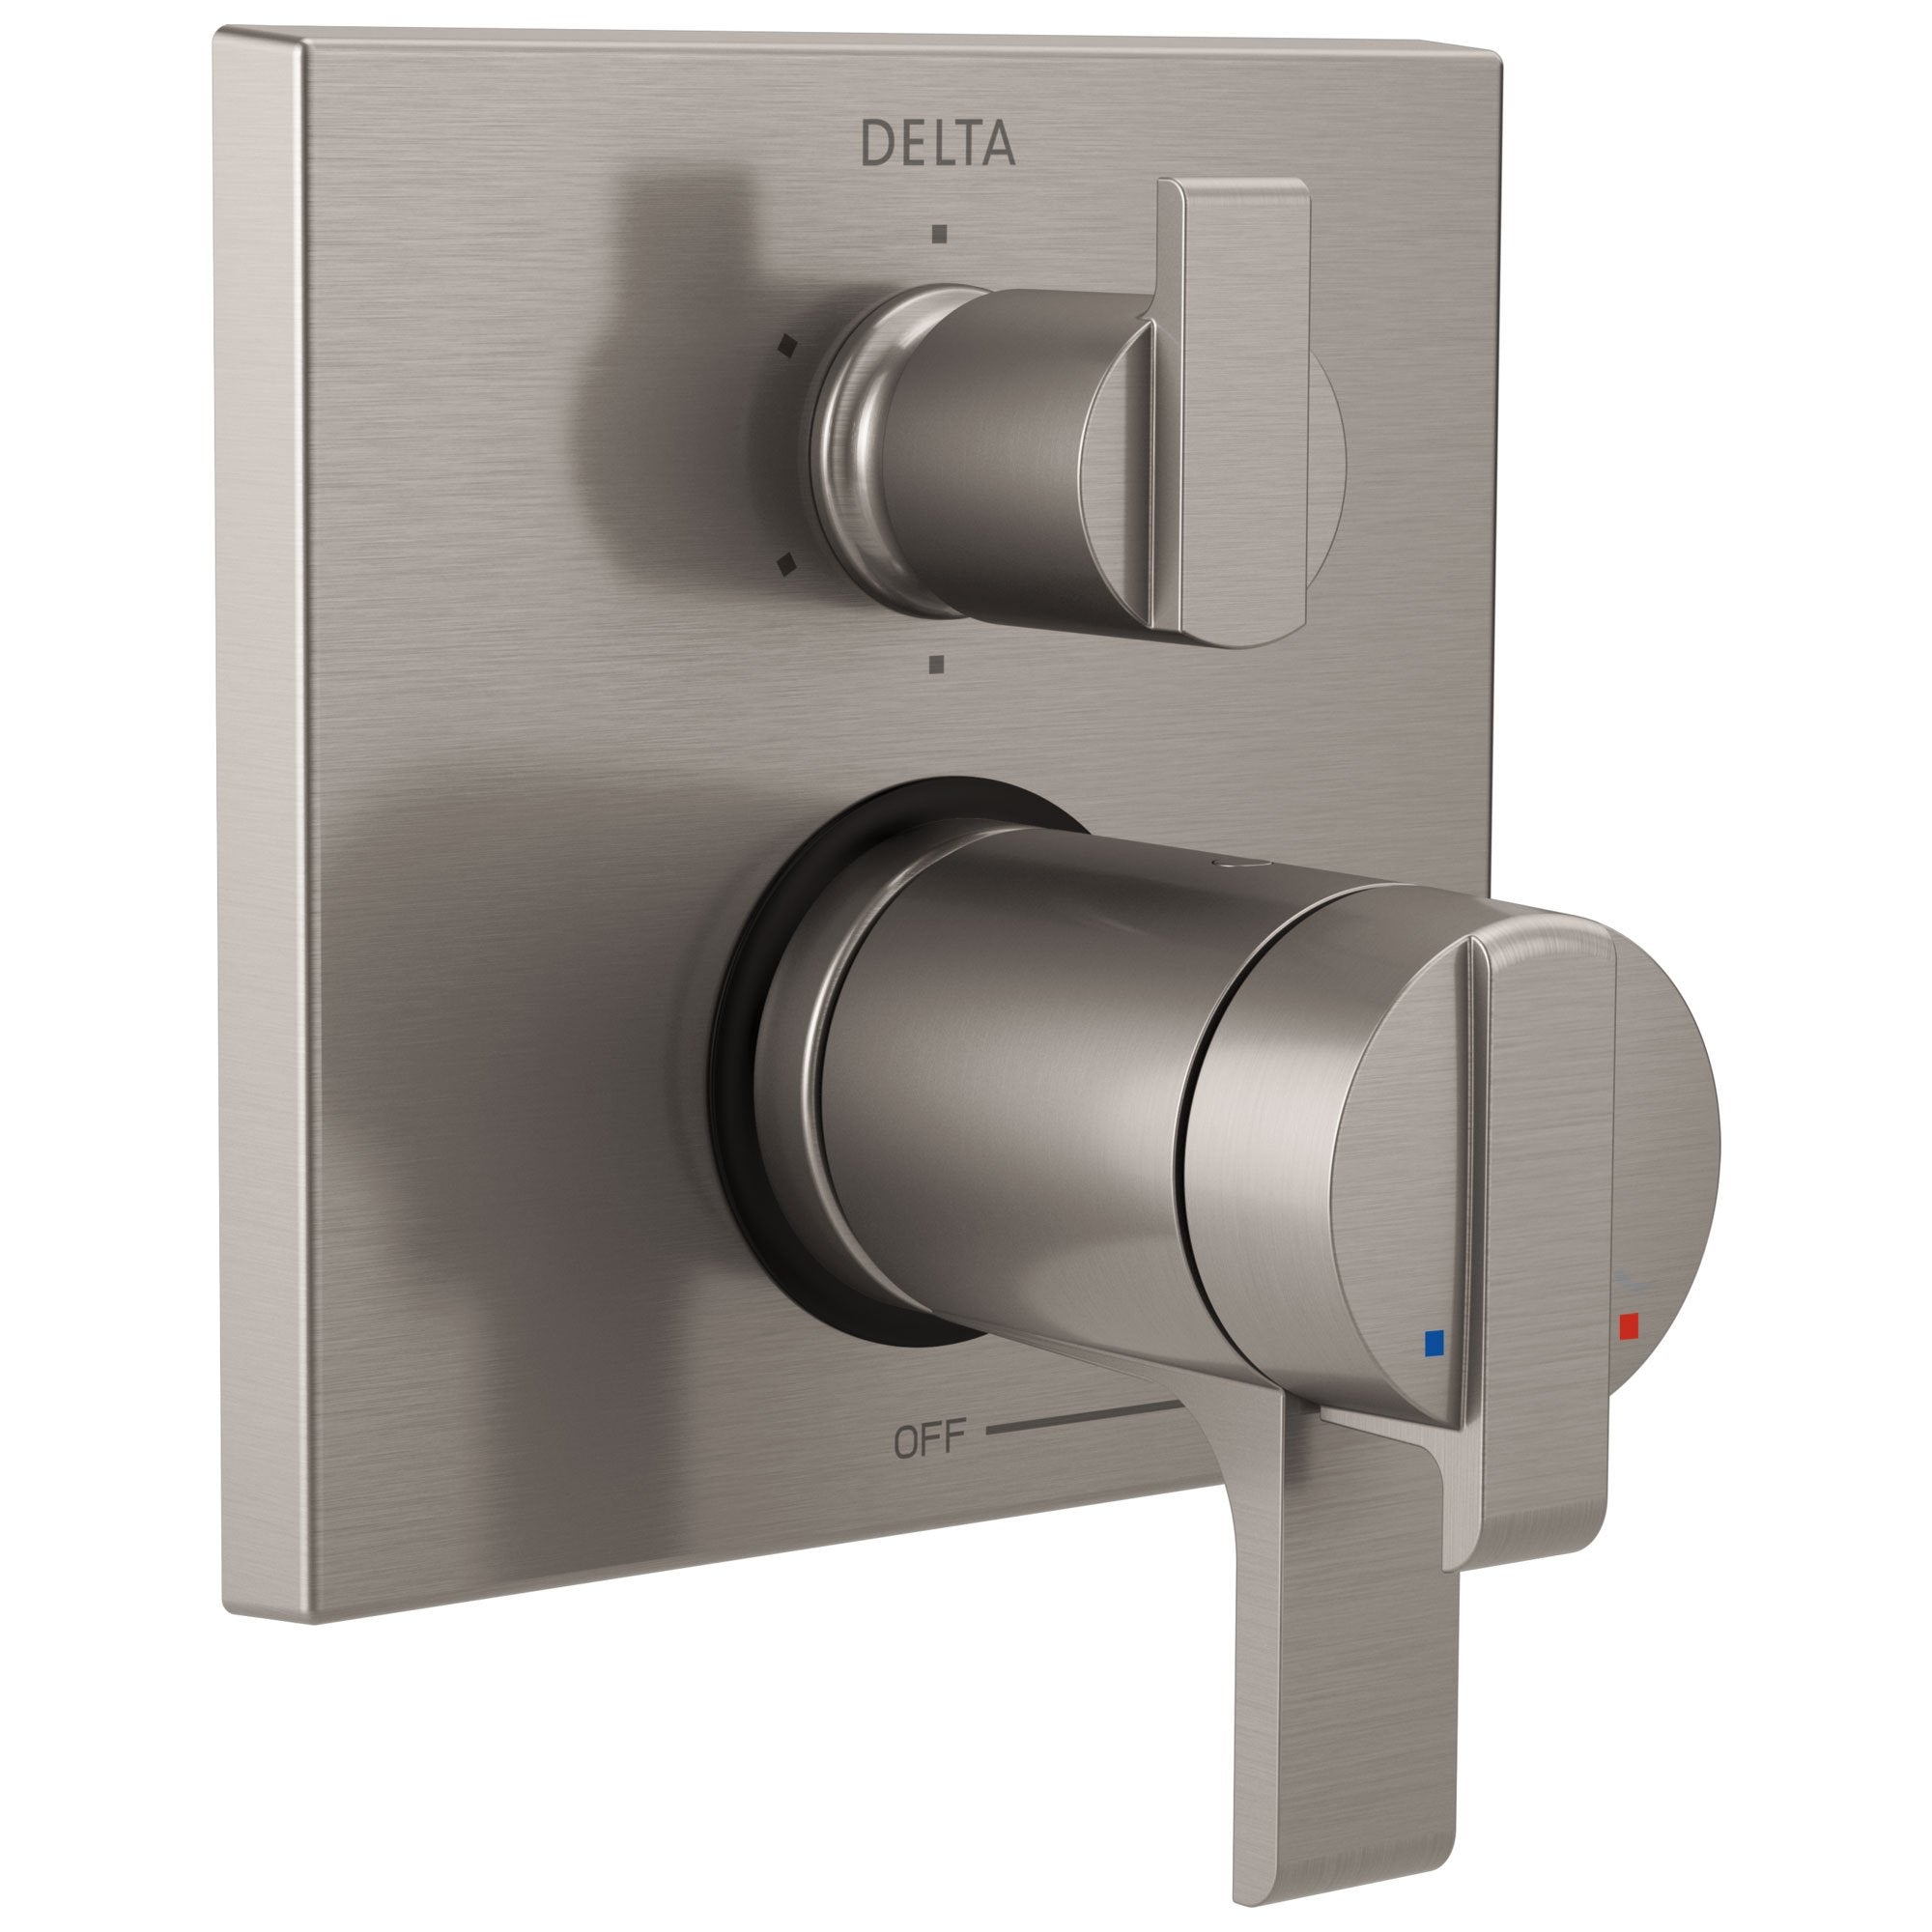 Delta Ara Collection Stainless Steel Finish Thermostatic Shower Faucet Control with 6-Setting Integrated Diverter Includes Trim Kit and Valve without Stops D2112V